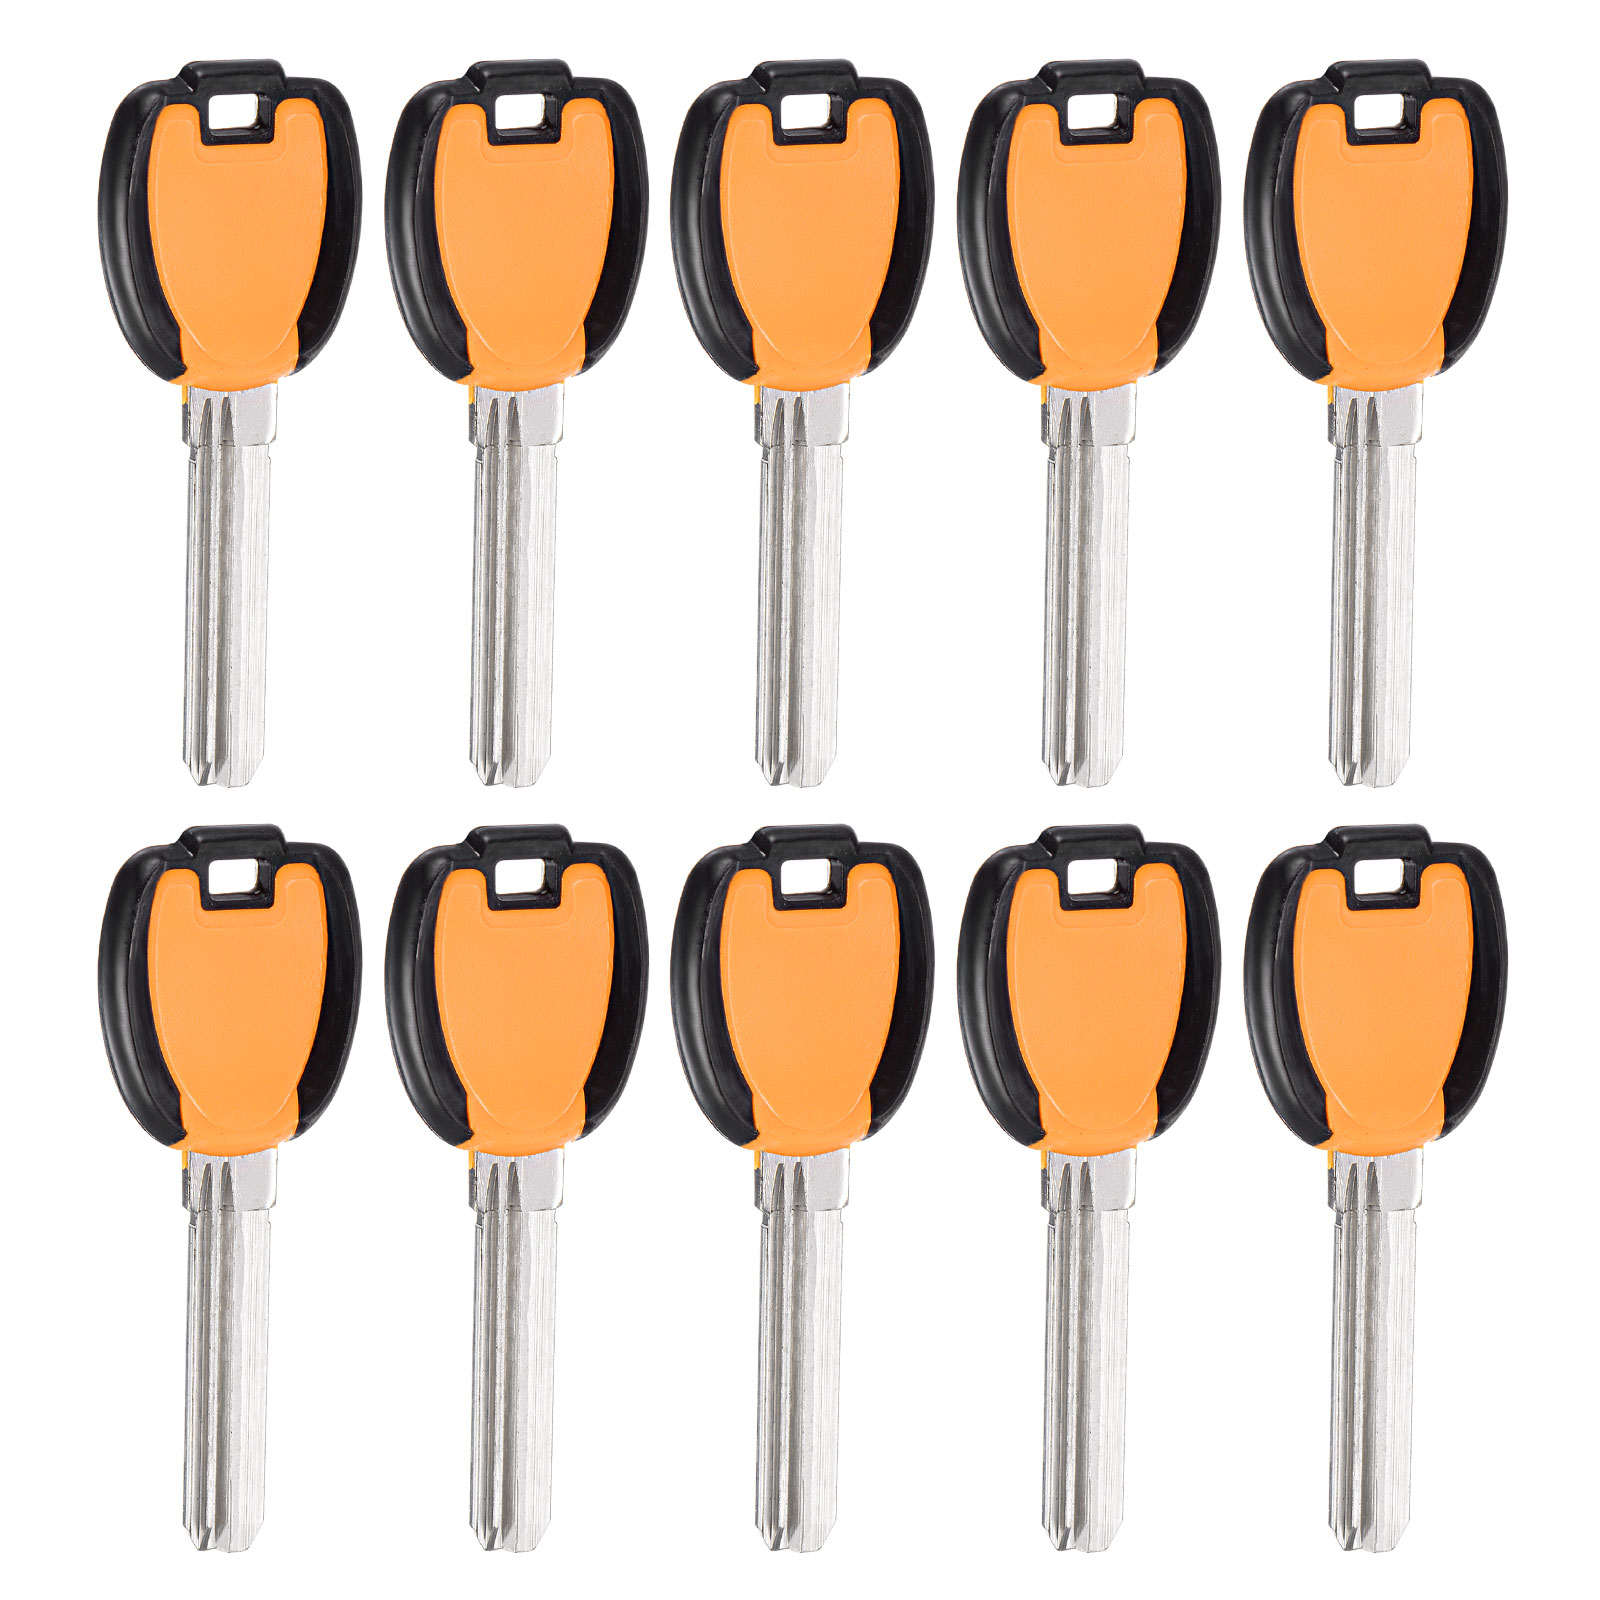 Uxcell Key Blank, 37.5mm Length 2 Slot Brass New Un-cut Replacement Tool 10 Pack - image 1 of 5